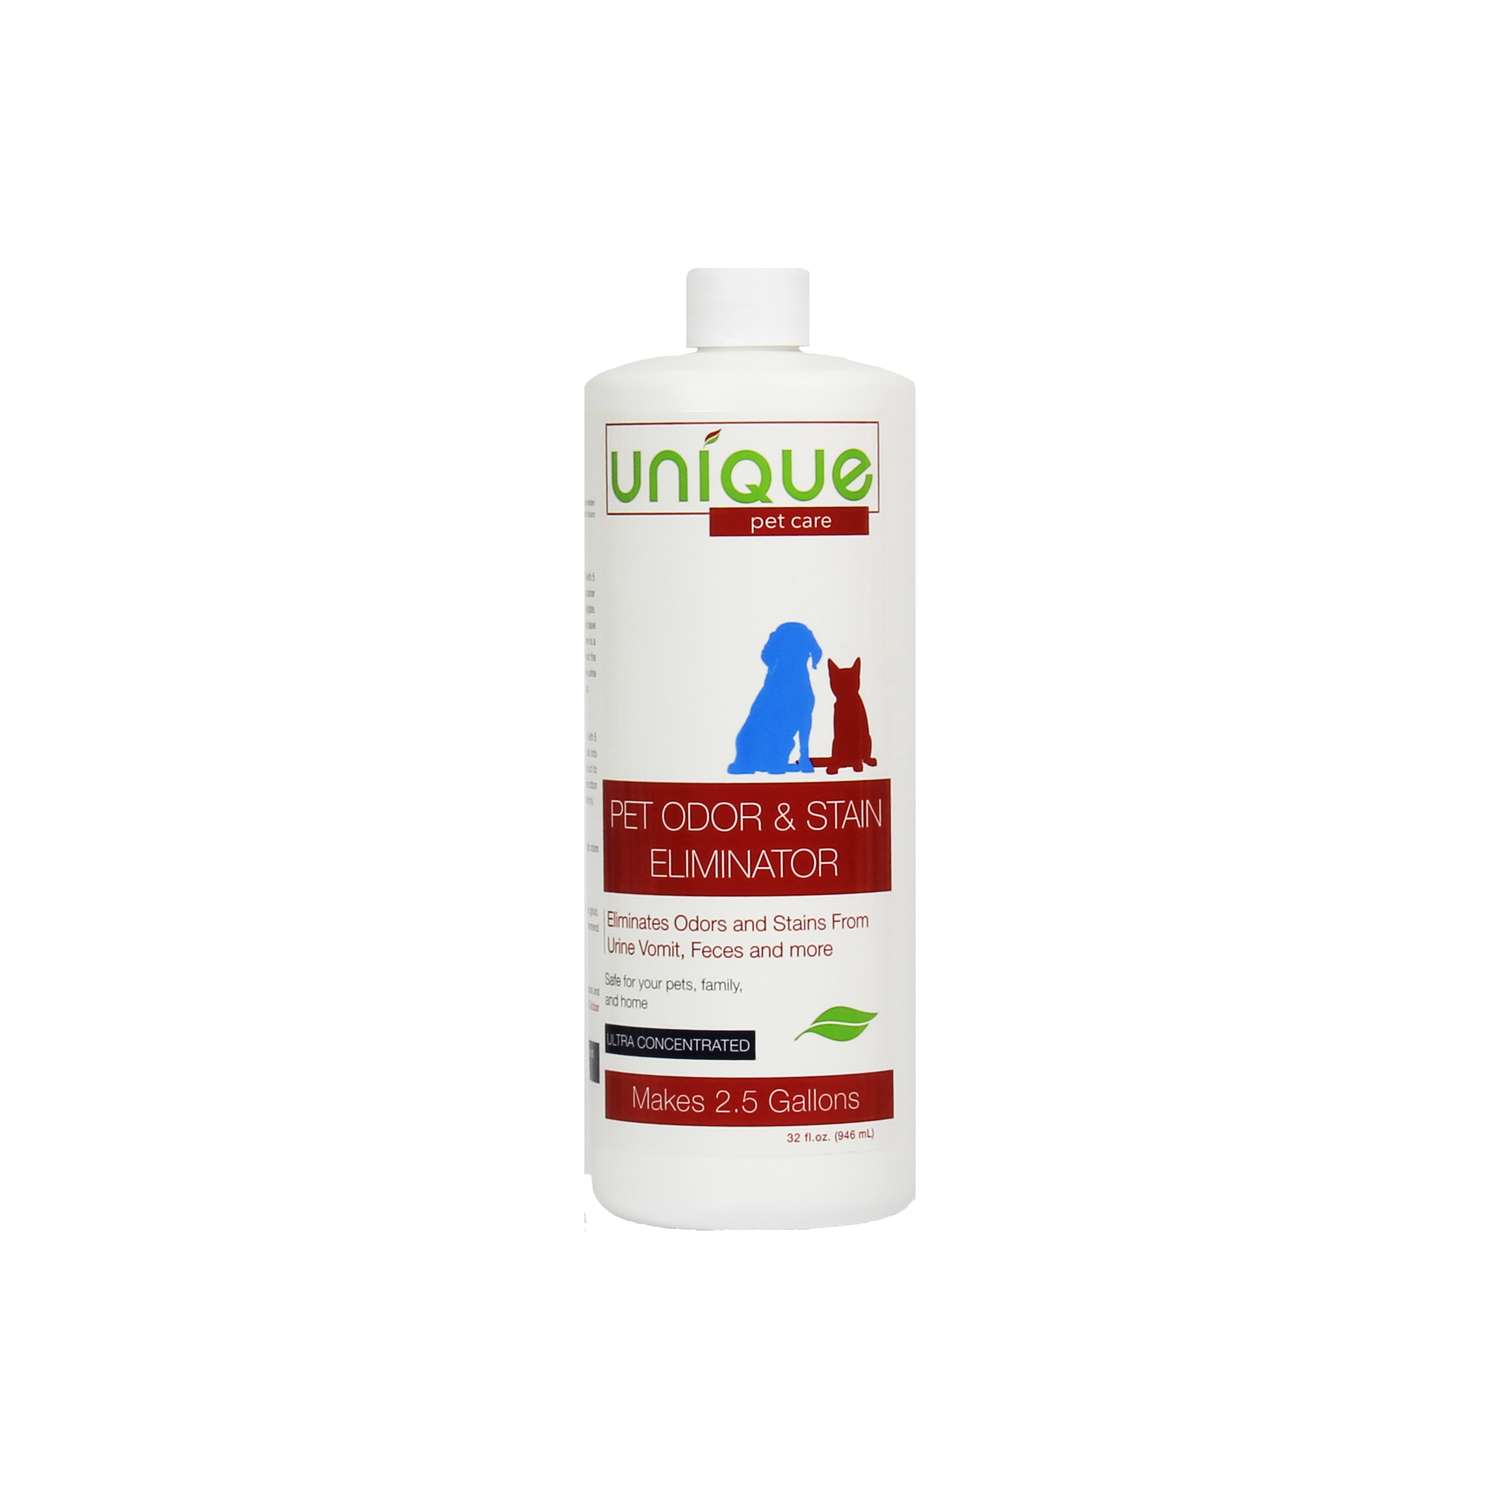  Amazing Patio Furniture Cleaner - Natural Enzymes Easily Remove  Dirt, Bird Droppings, Food Stains and More from Your Outdoor and Patio  Furniture - USA Made : Health & Household